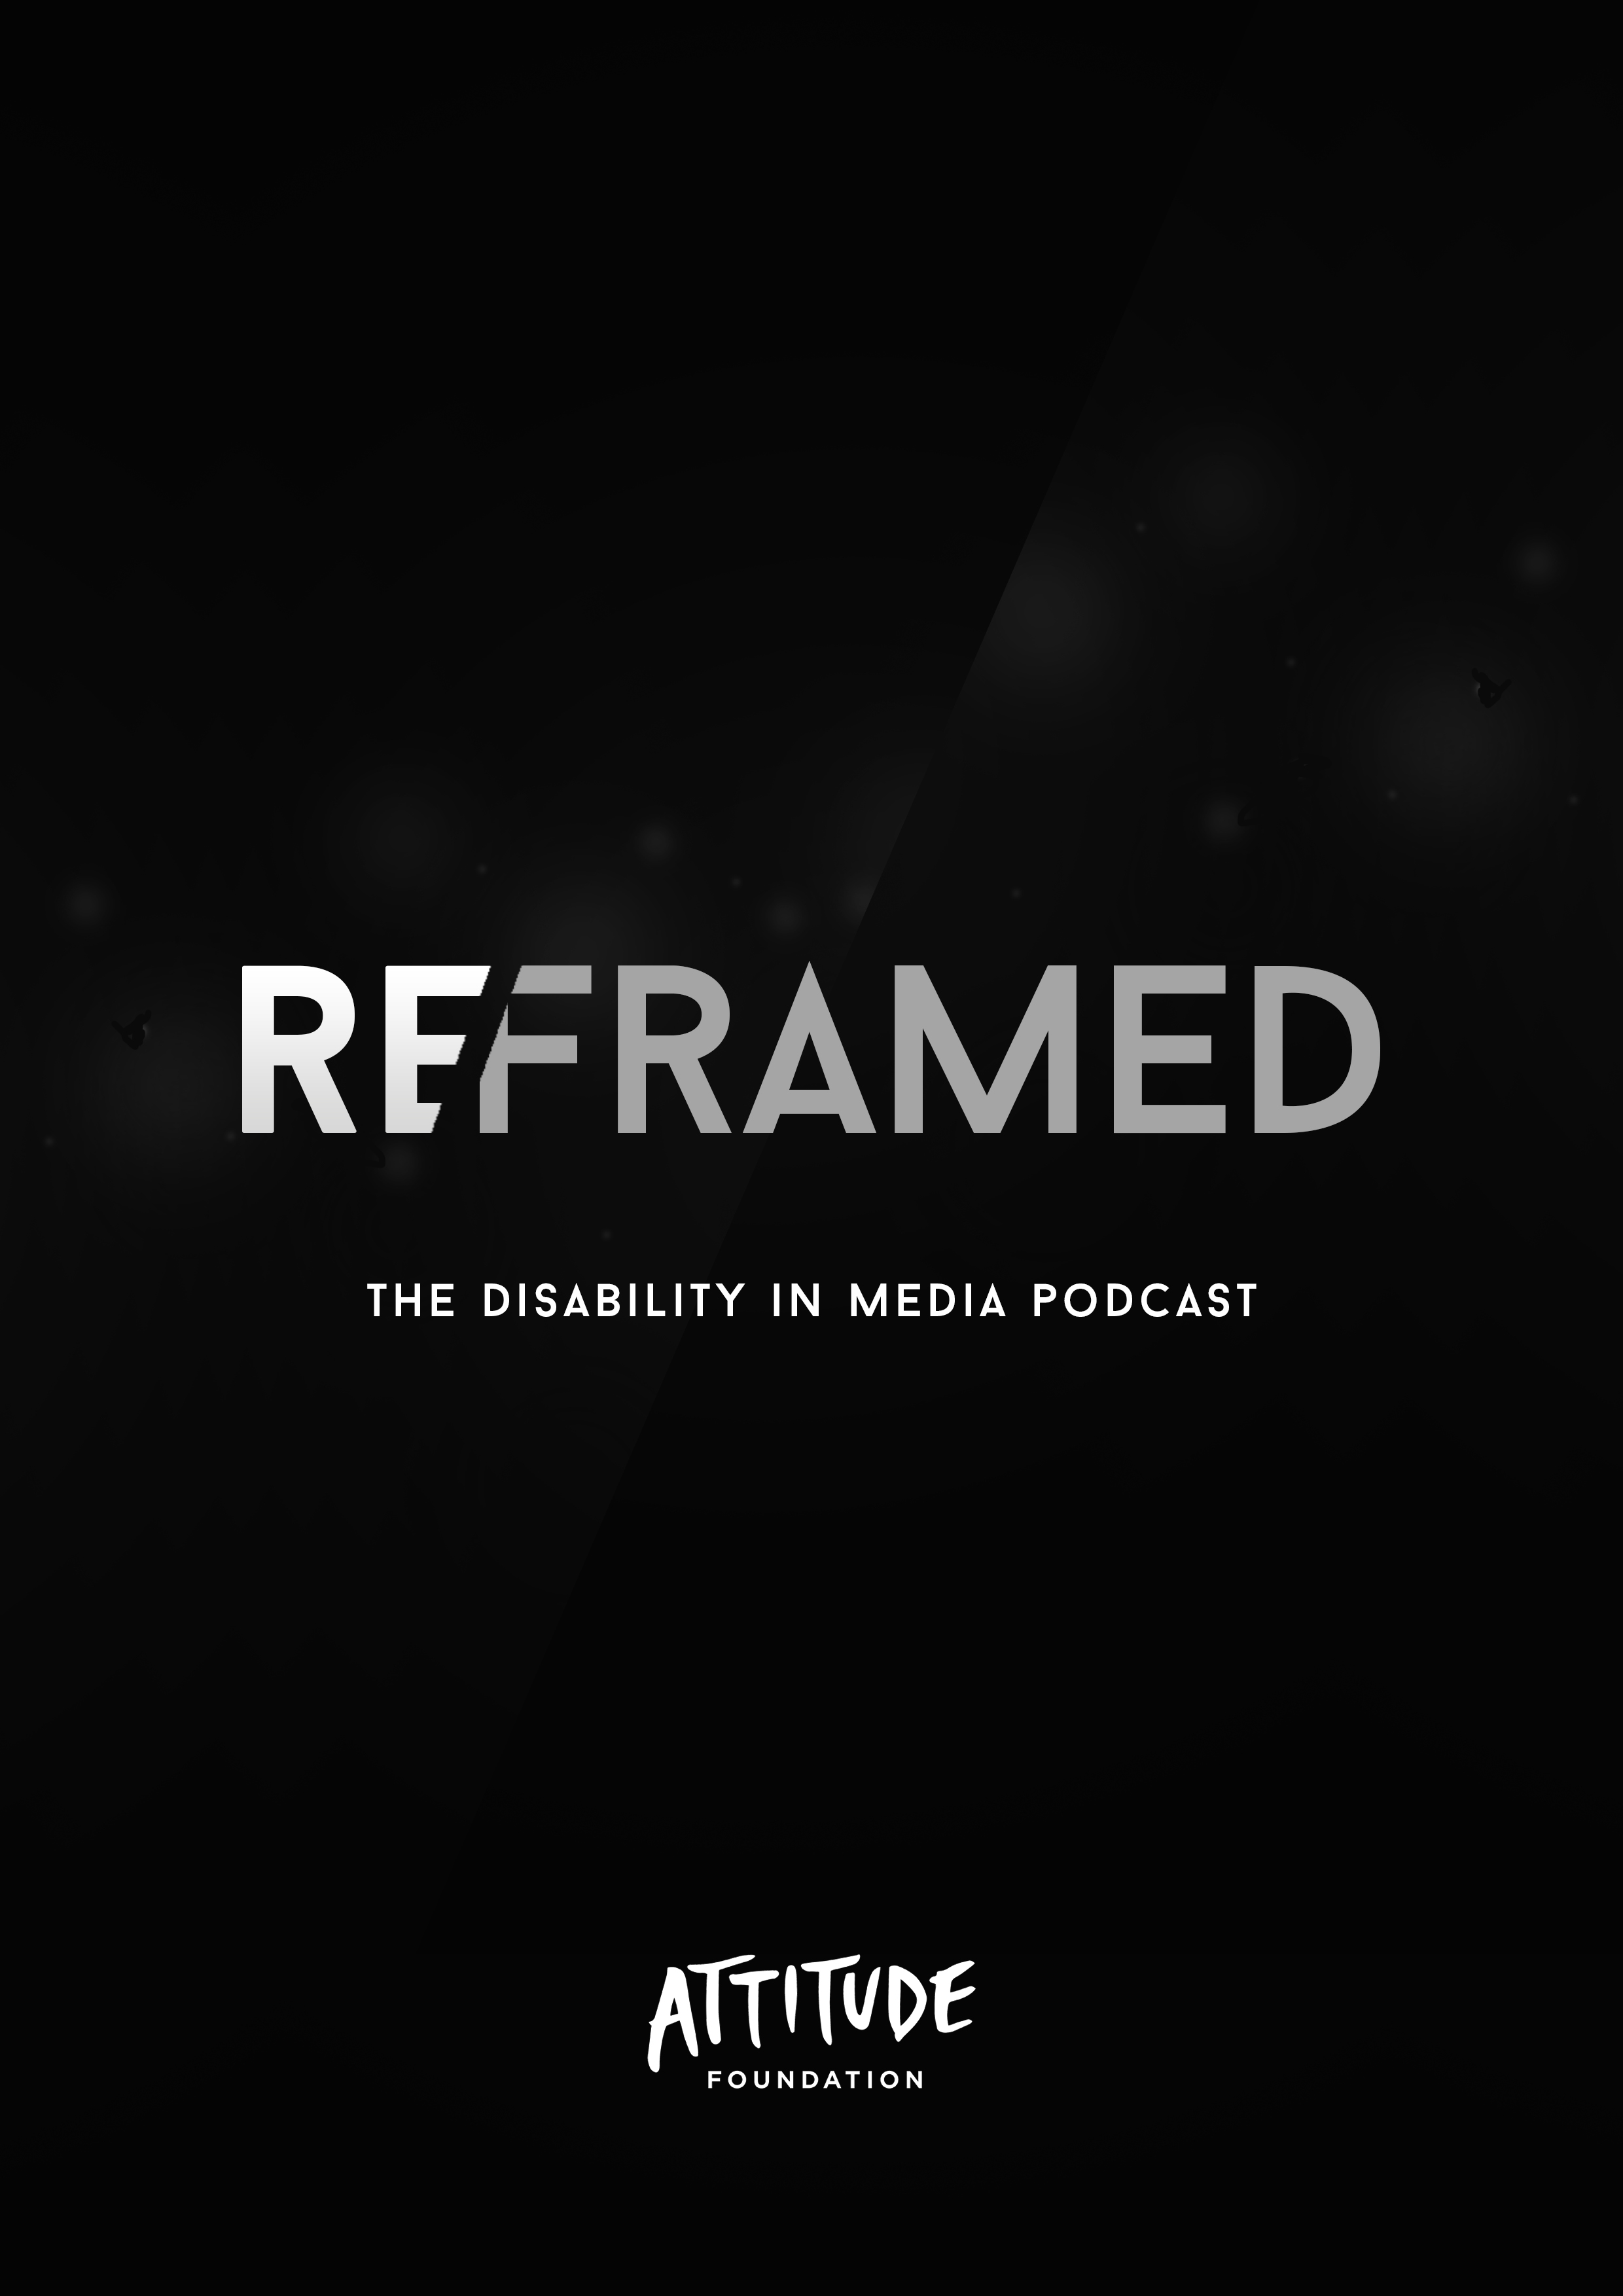 A poster for the Attitude Foundation podcast series - ReFramed Disability In Media